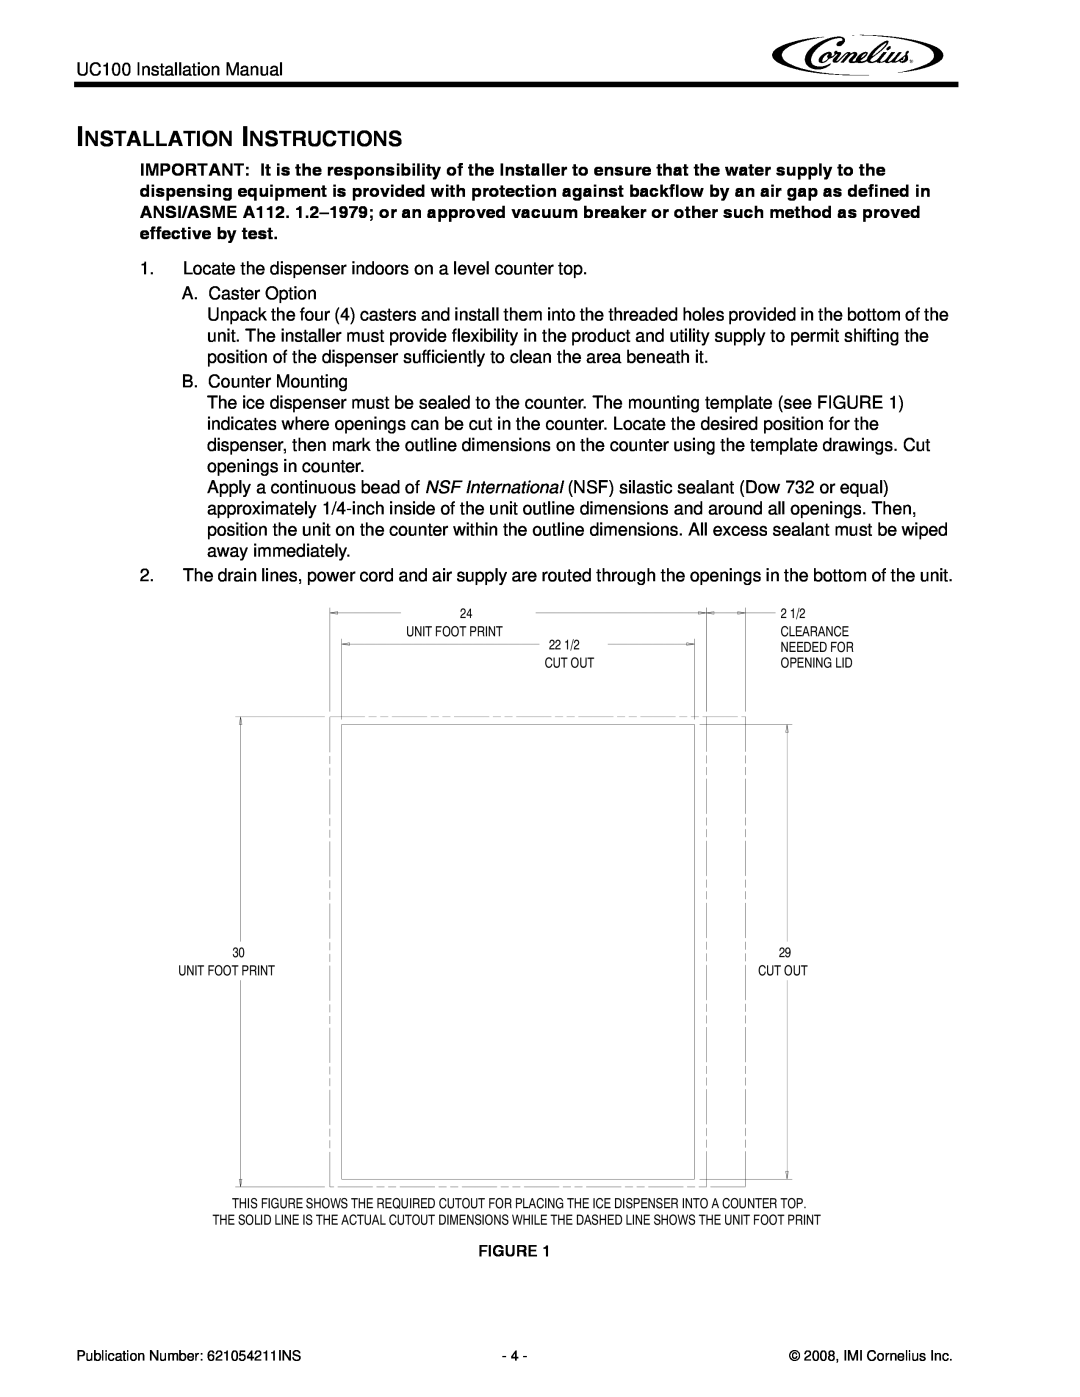 Cornelius UC100 installation manual Installation Instructions, Unit Foot Print, Clearance, Needed For, Opening Lid 